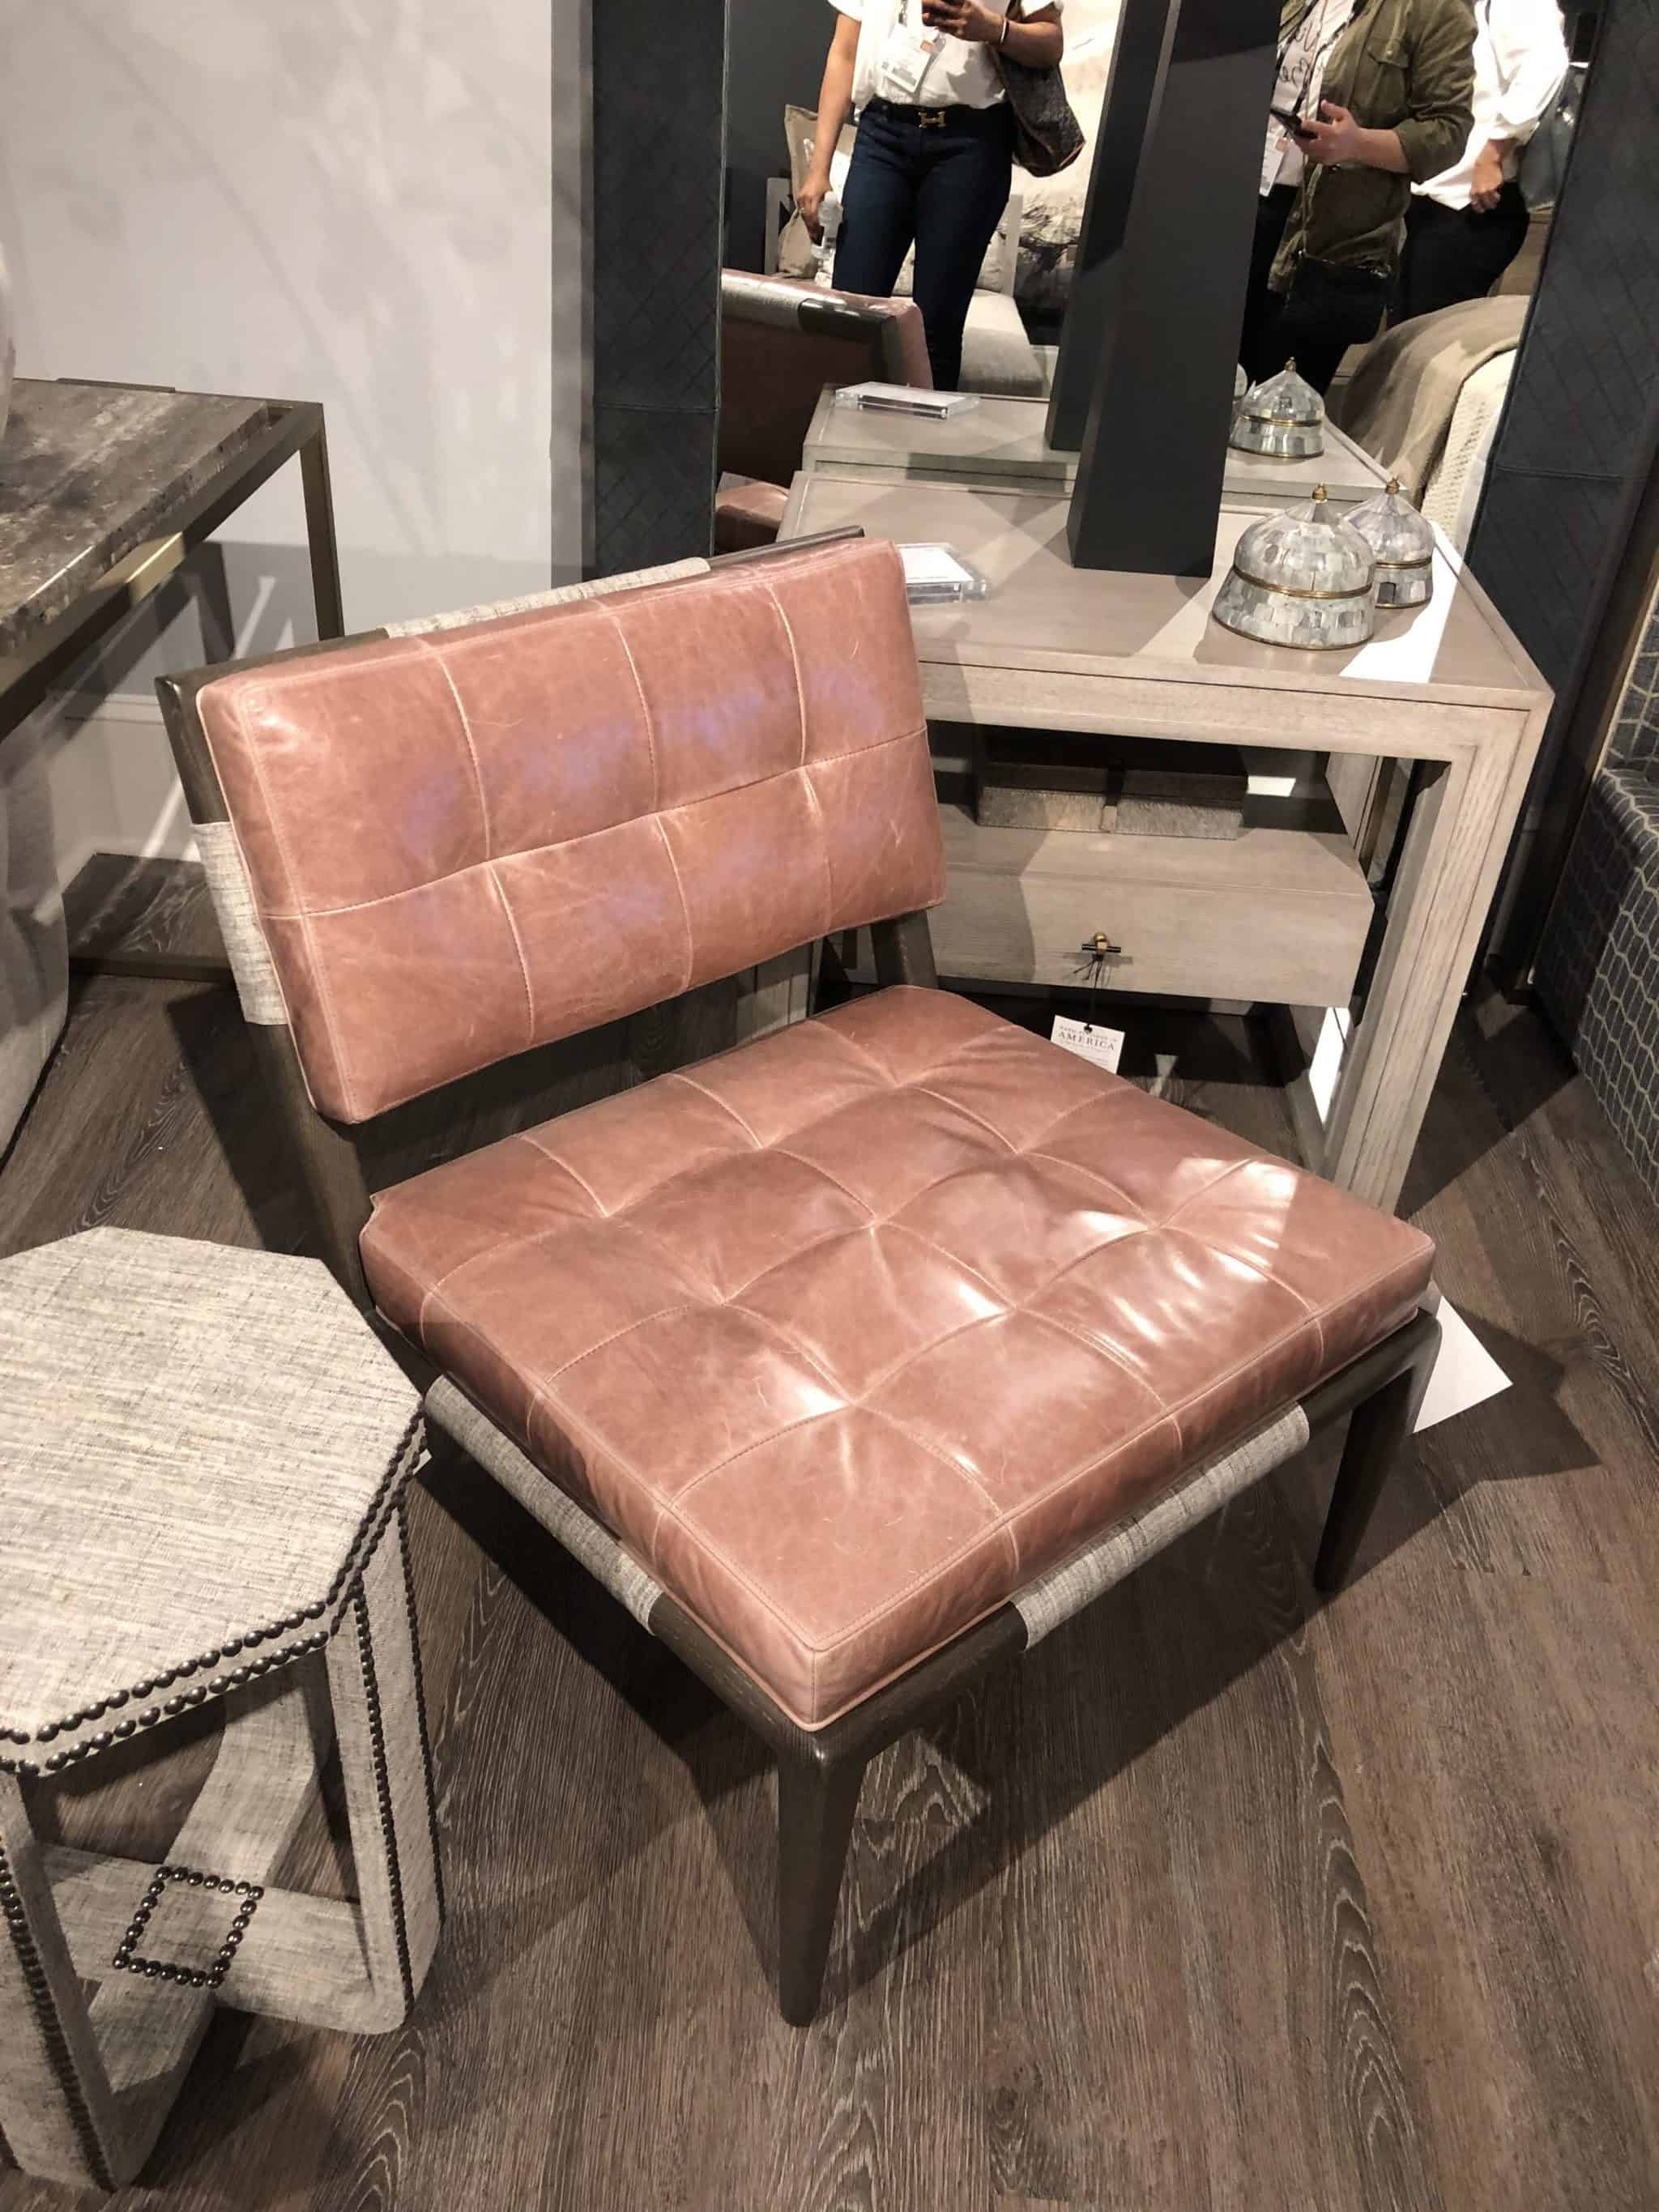 Thom Filicia collection at High Point Market 2019